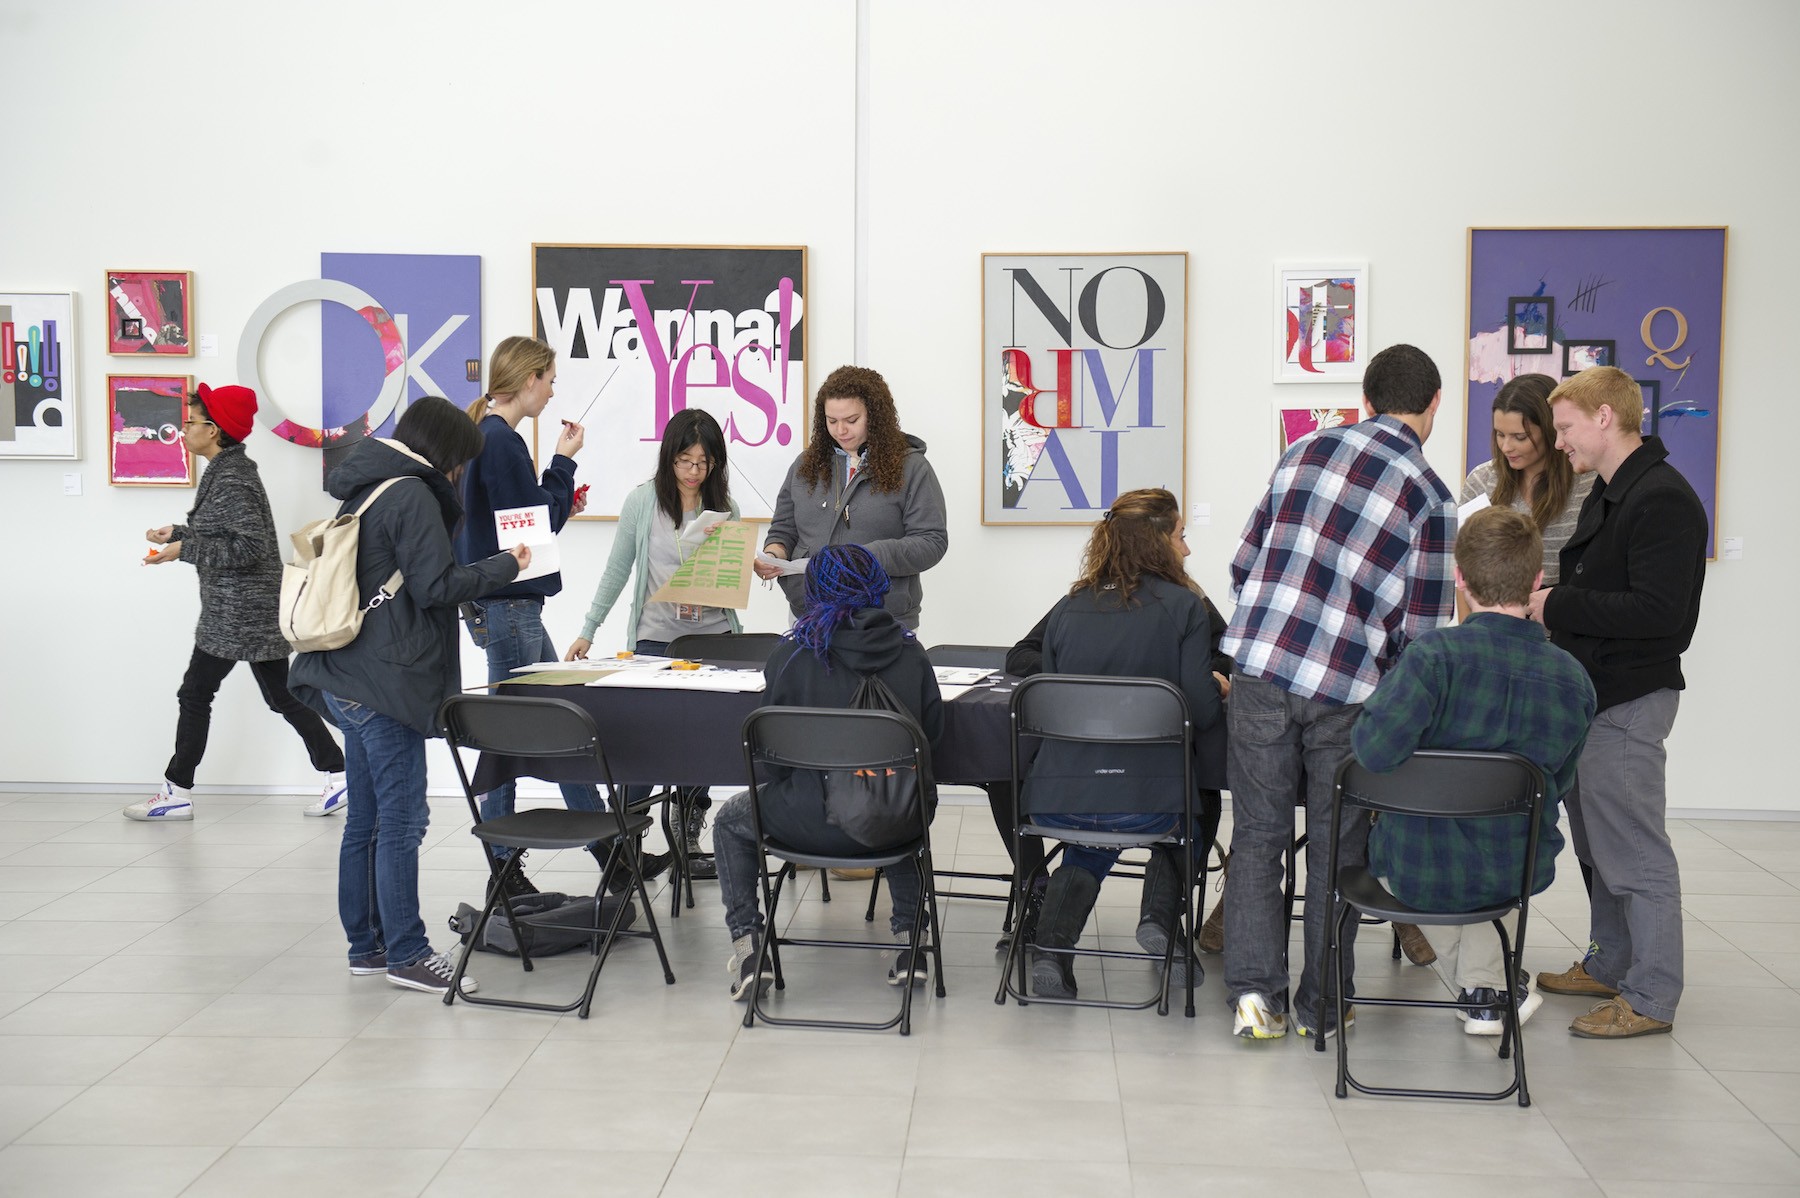 Group of students gathered around a table with graphic poster exhibition on walls in backdrop.